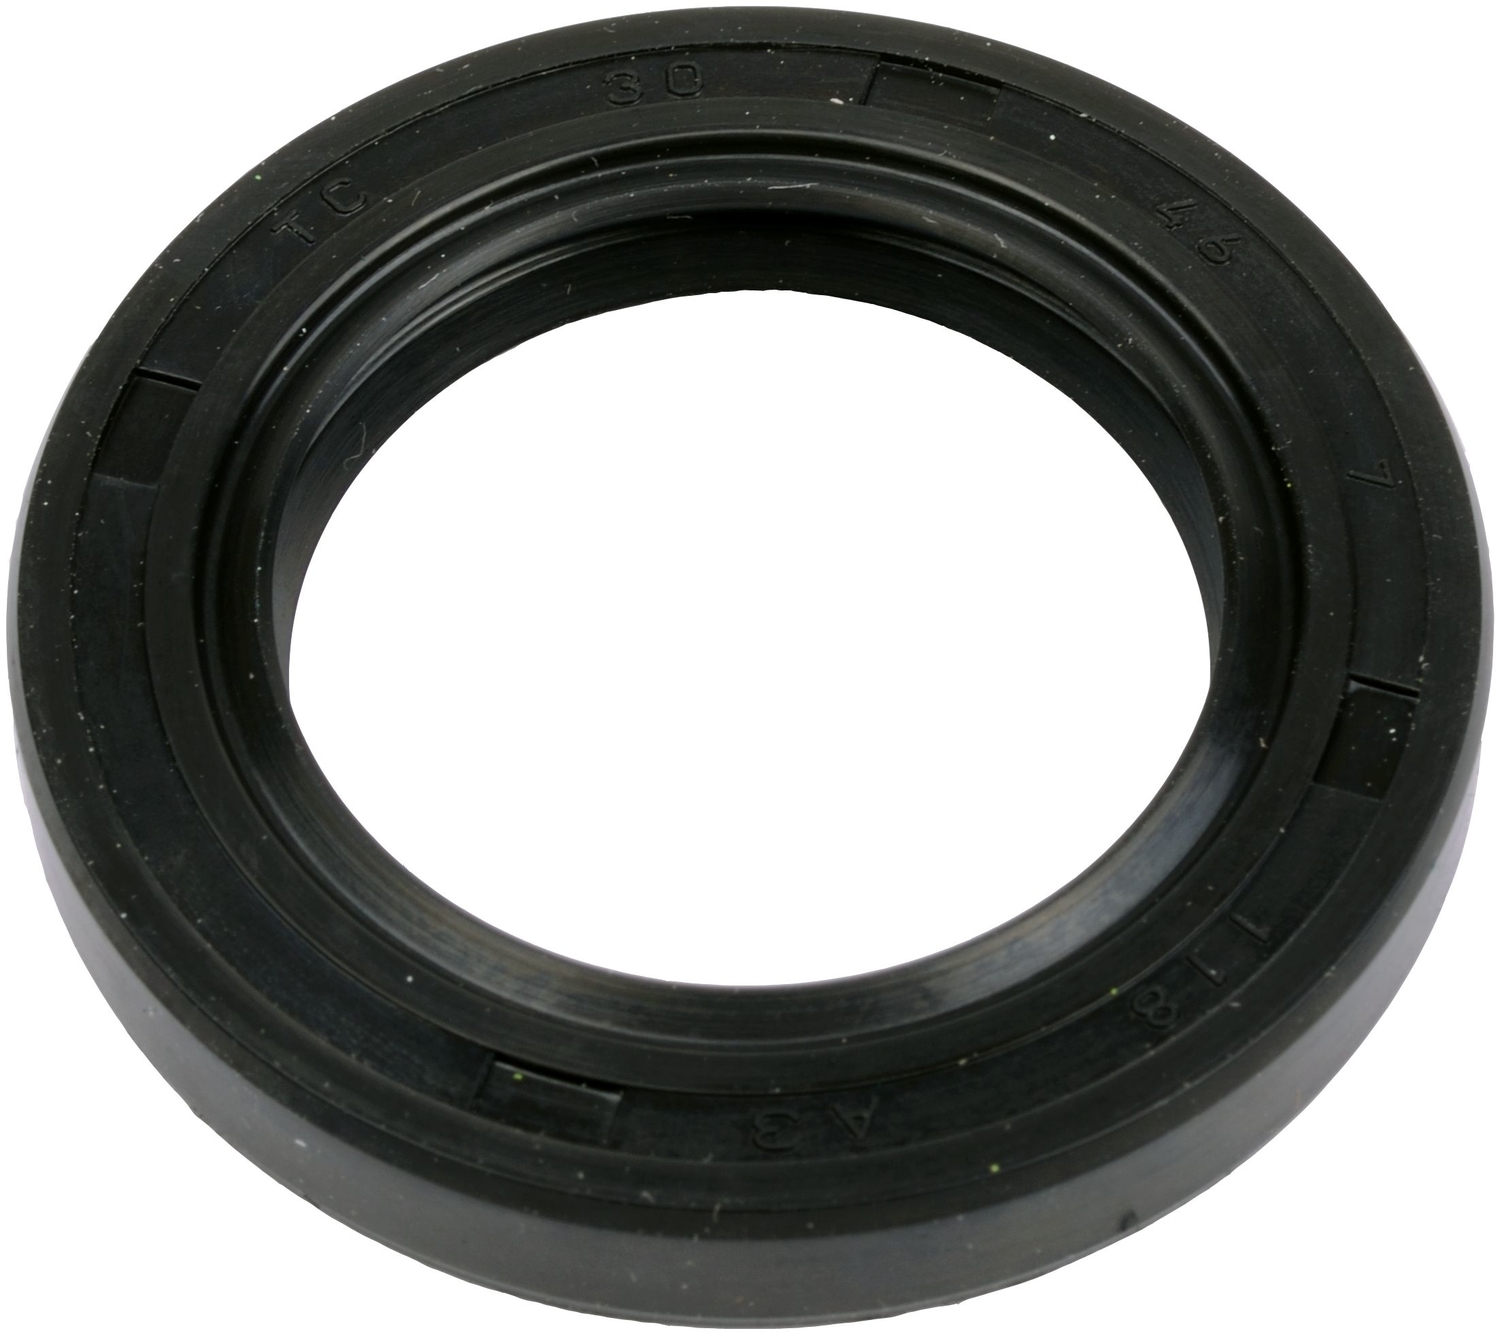 SKF (CHICAGO RAWHIDE) - Auto Trans Extension Housing Seal (Rear) - SKF 15920